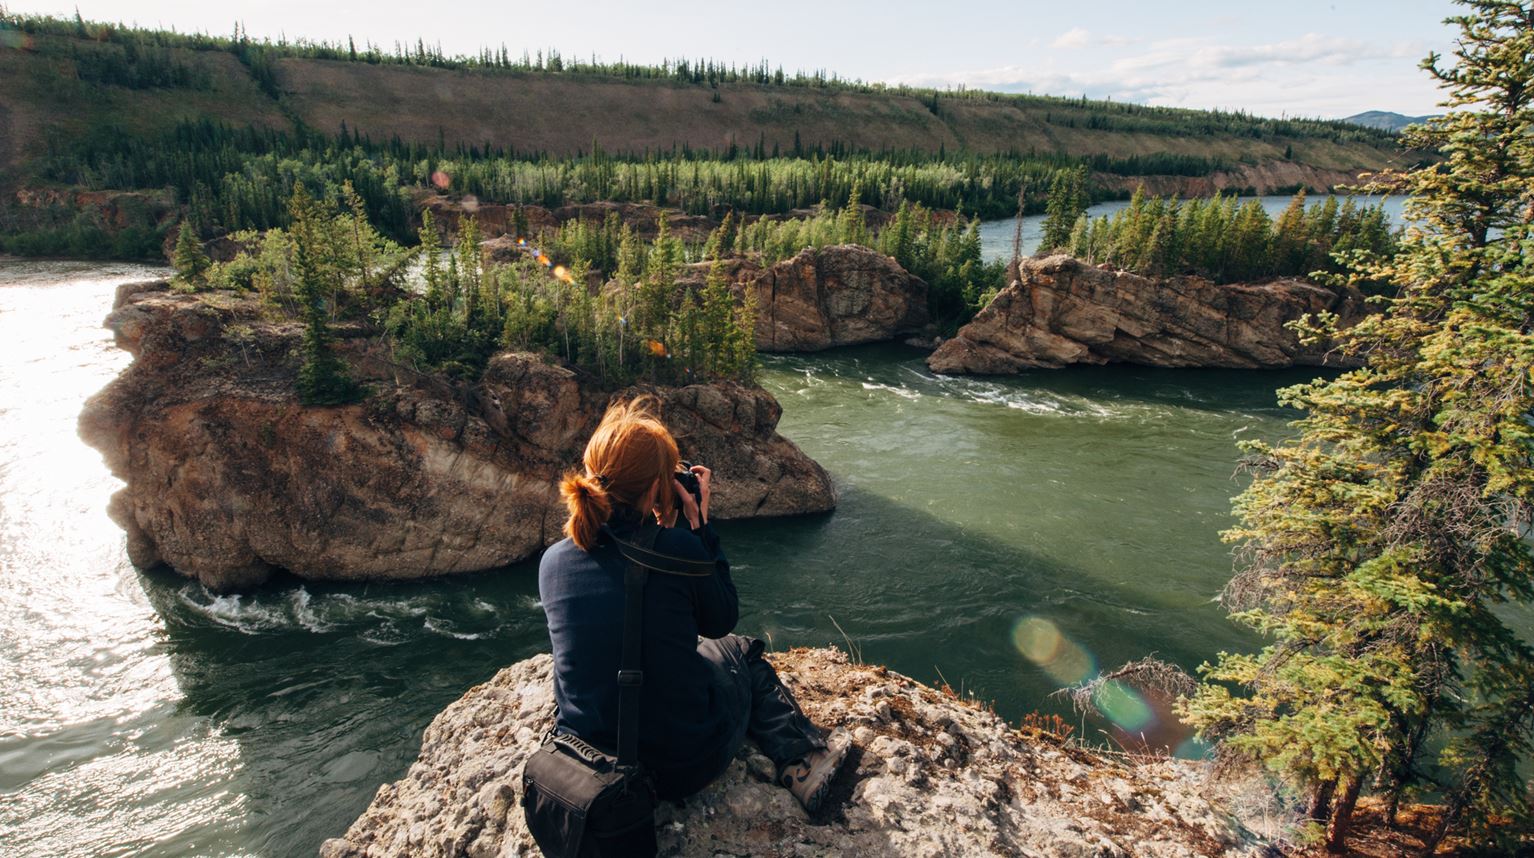 A Woman Sitting On Cliff by a River, Whitehorse, Canada 